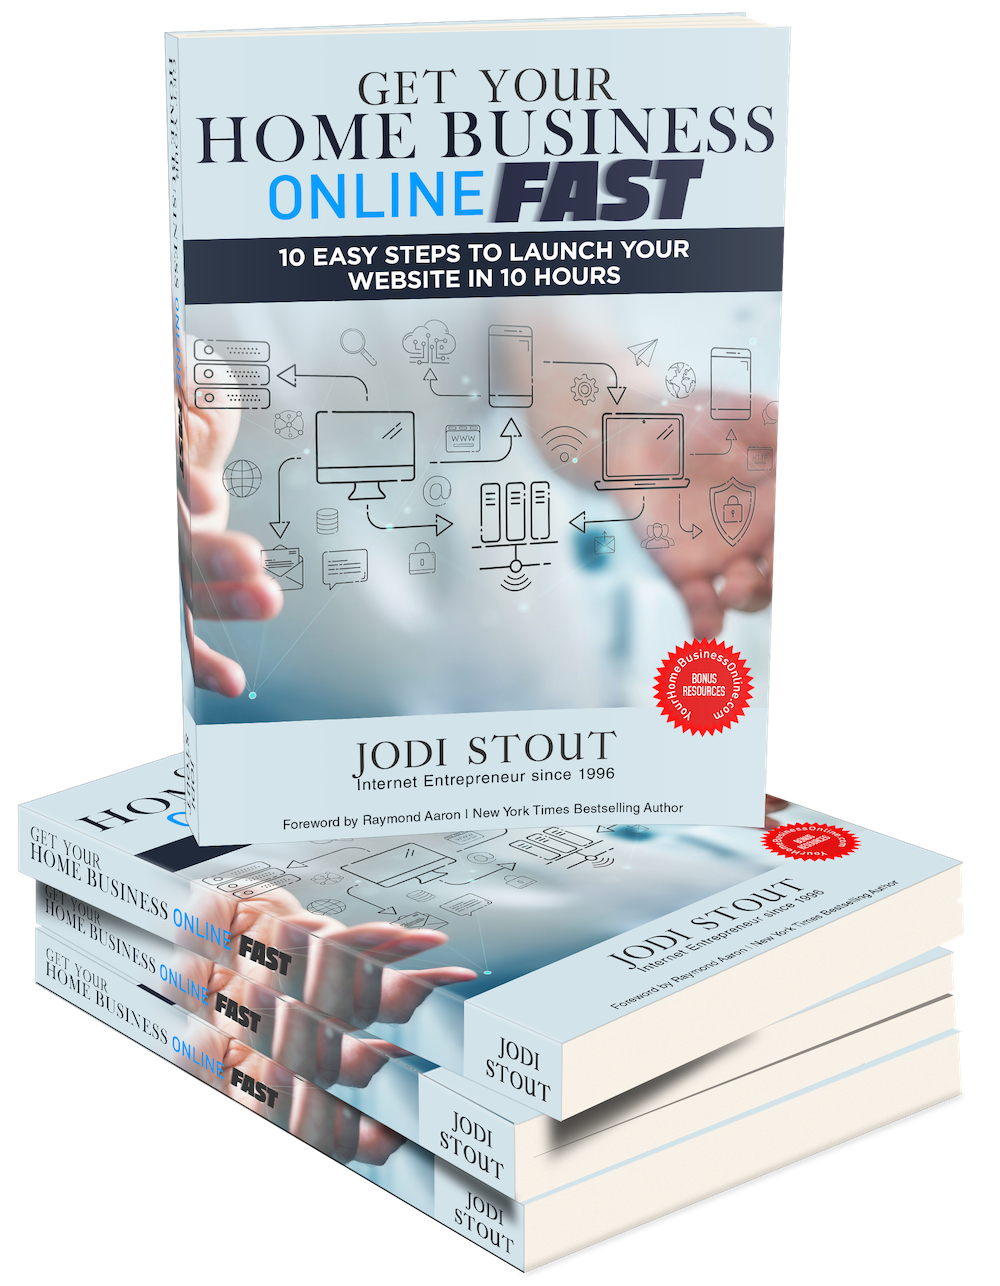 Get Your Home Business Online - Website in a Weekend Workbook by Jodi Stout